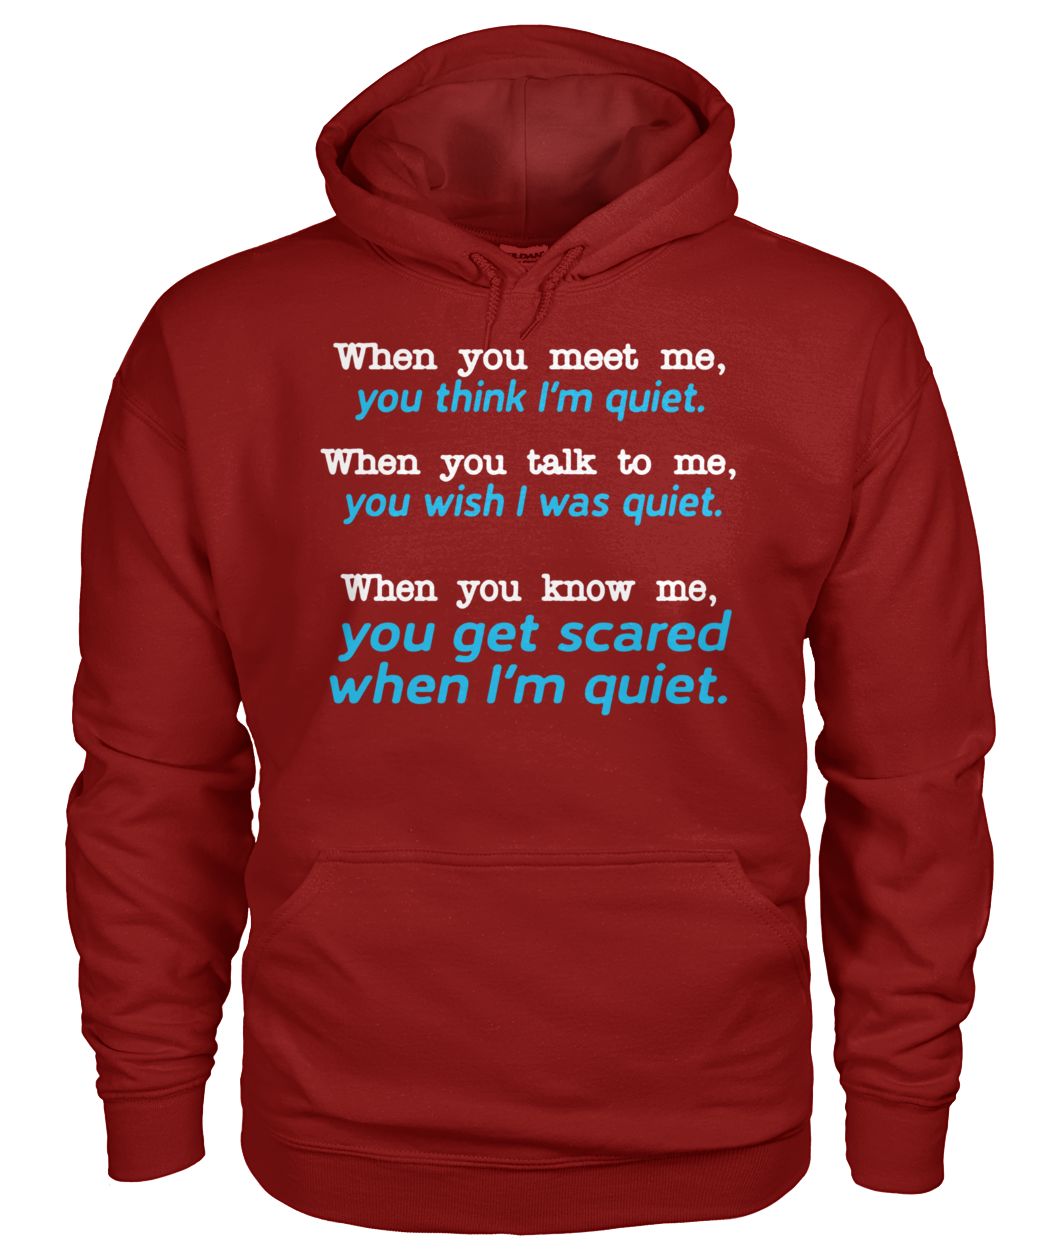 When you meet me think I'm quiet when you talk to me you wish I was quiet gildan hoodie